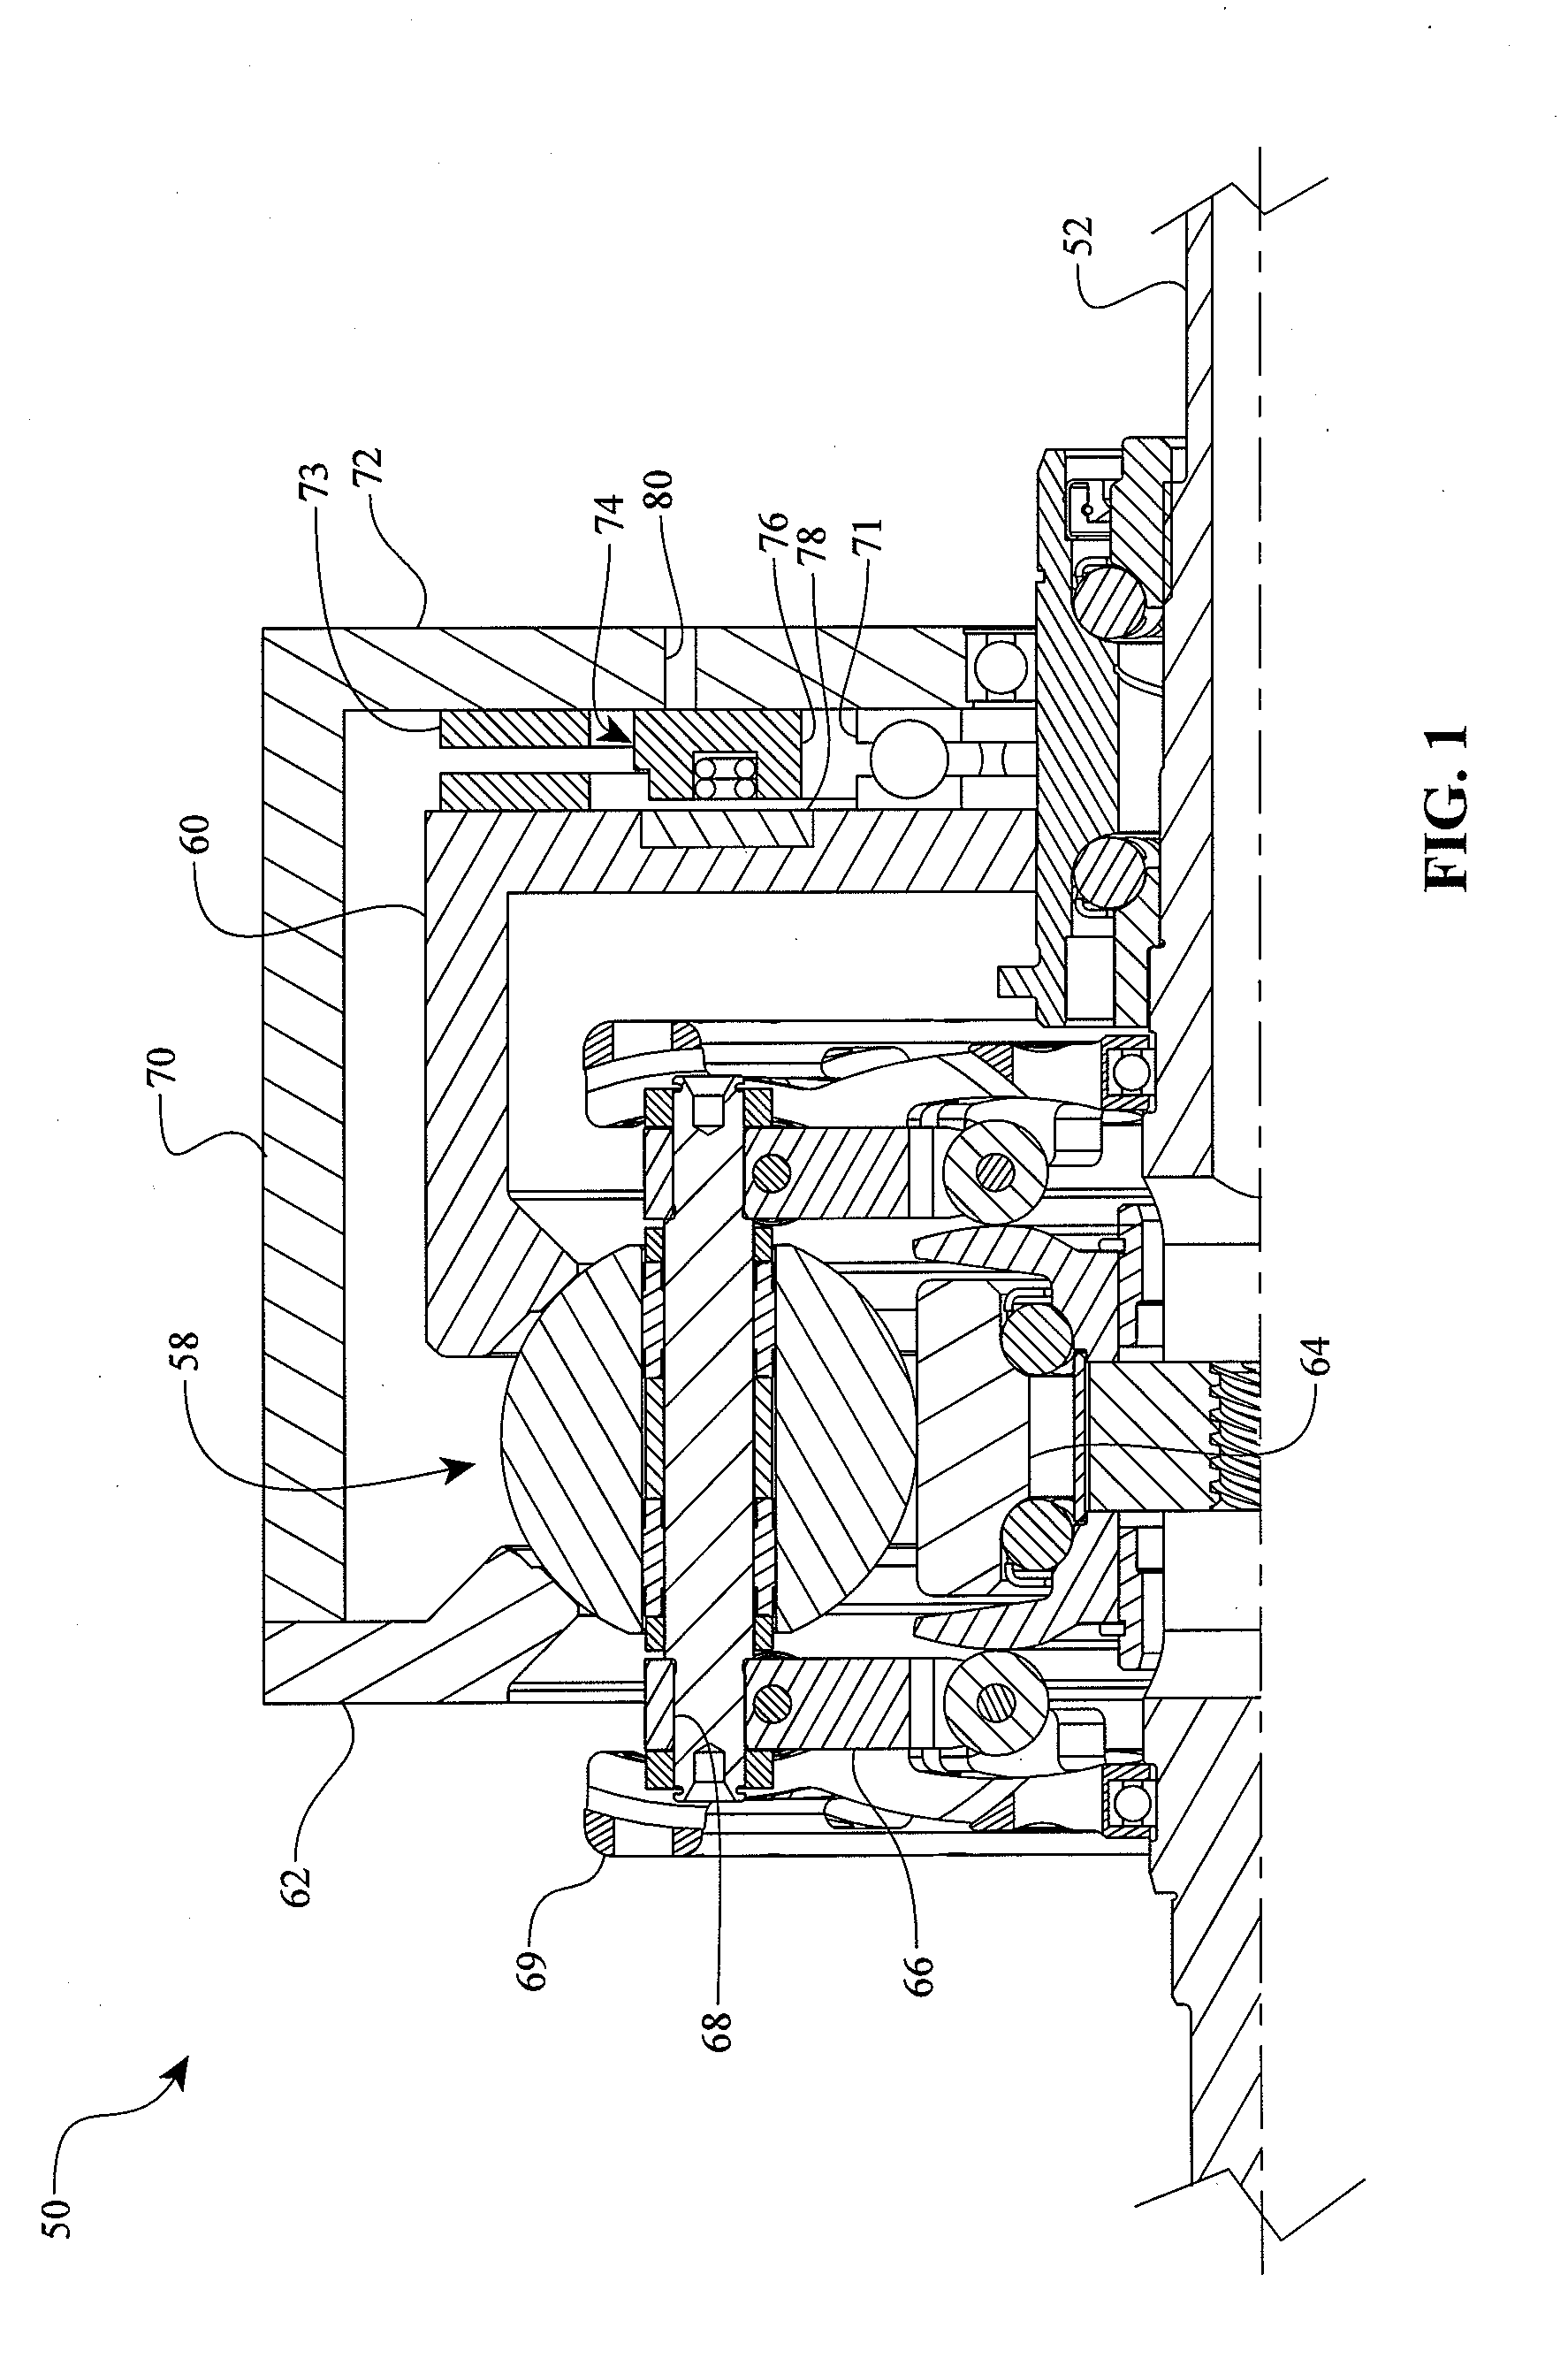 Assemblies and methods for clamping force generation